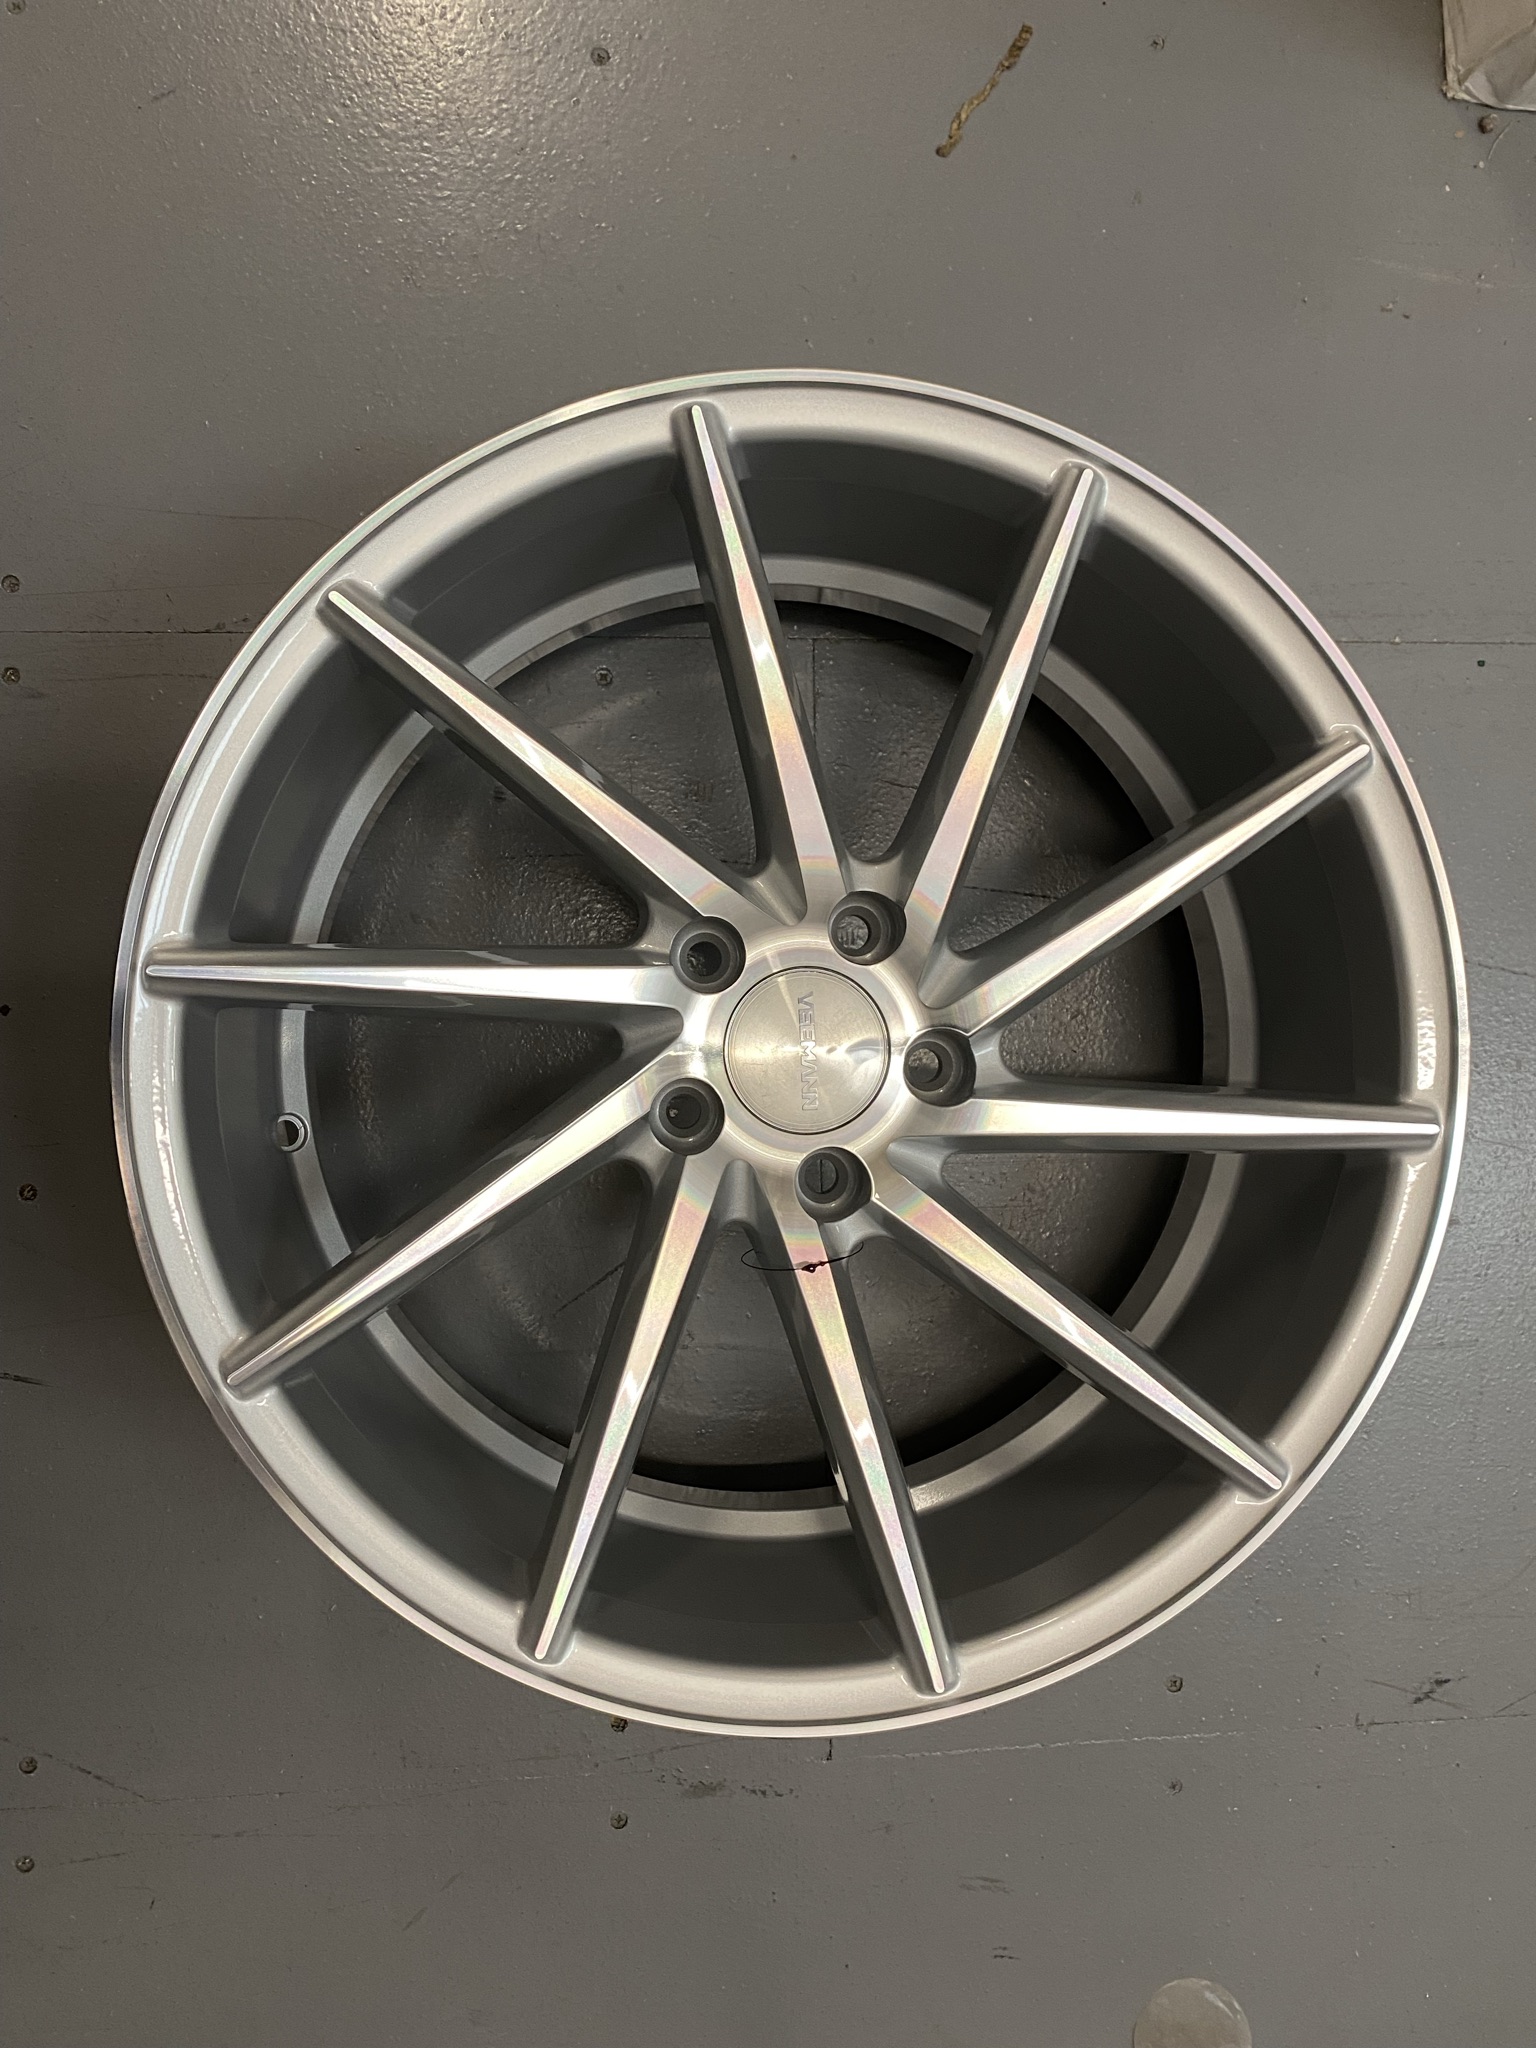 NEW 18" VEEMANN V-FS10 DIRECTIONAL CONCAVE ALLOY WHEELS IN SILVER WITH POLISHED FACE, WIDER 9" REARS